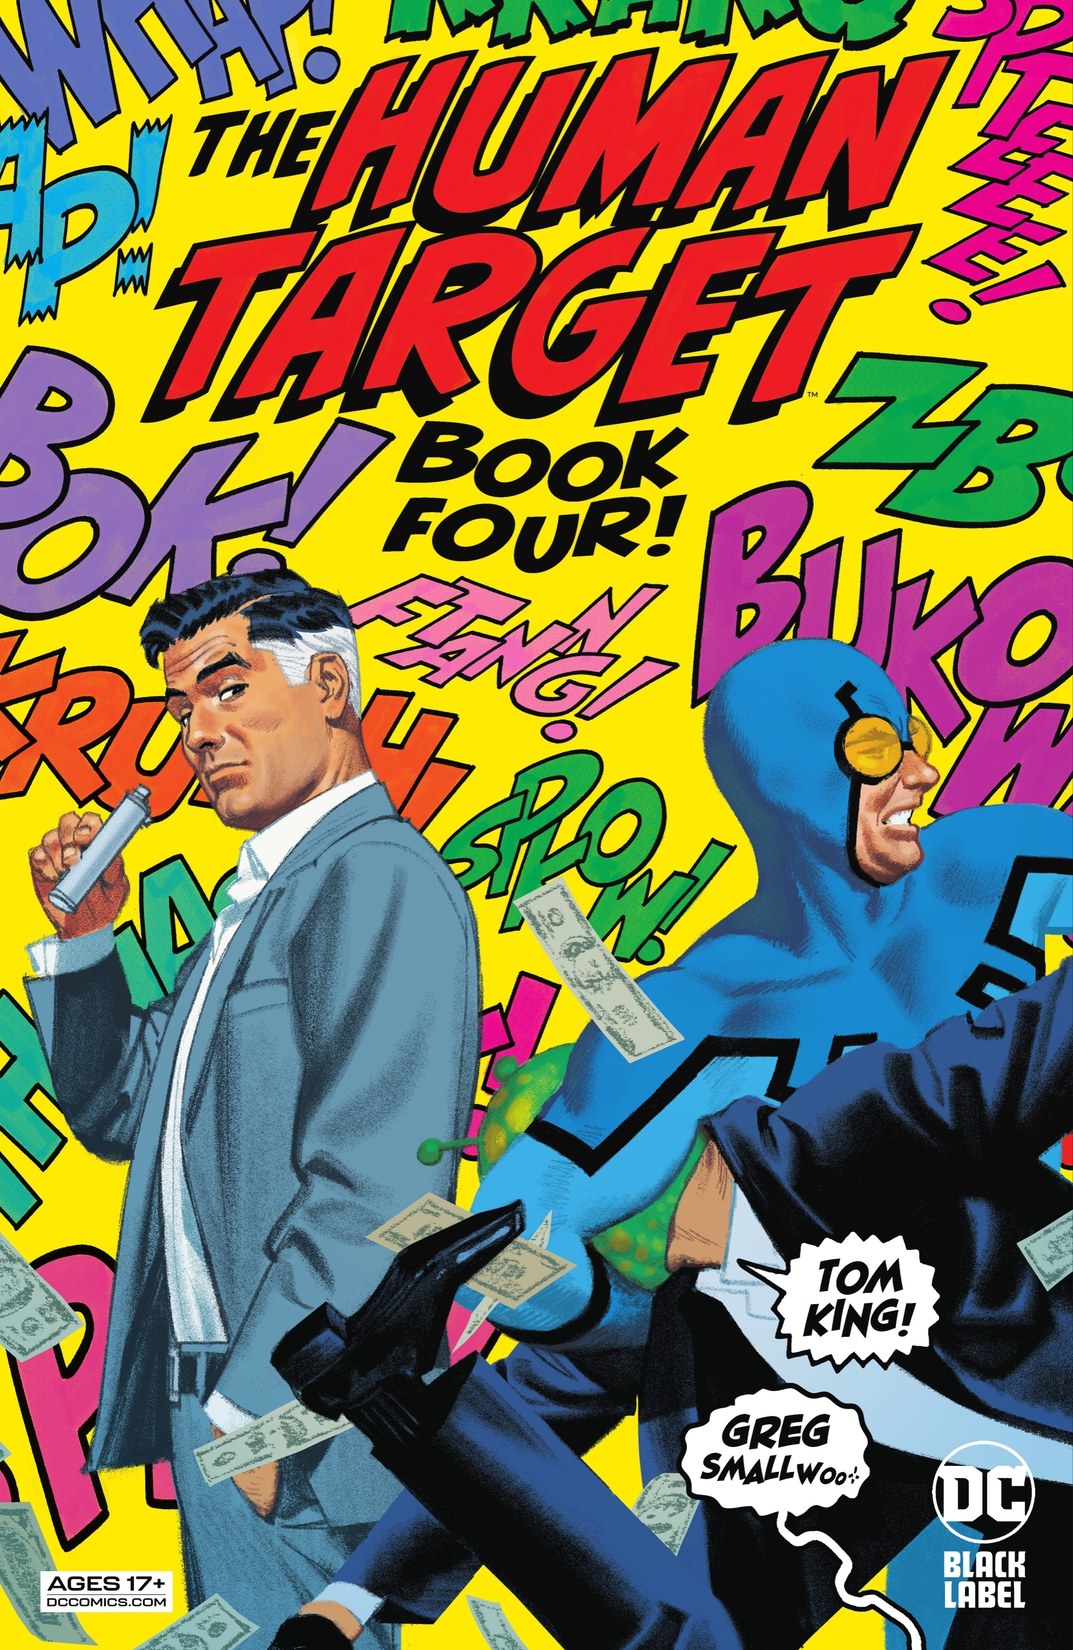 The Human Target #4 preview images